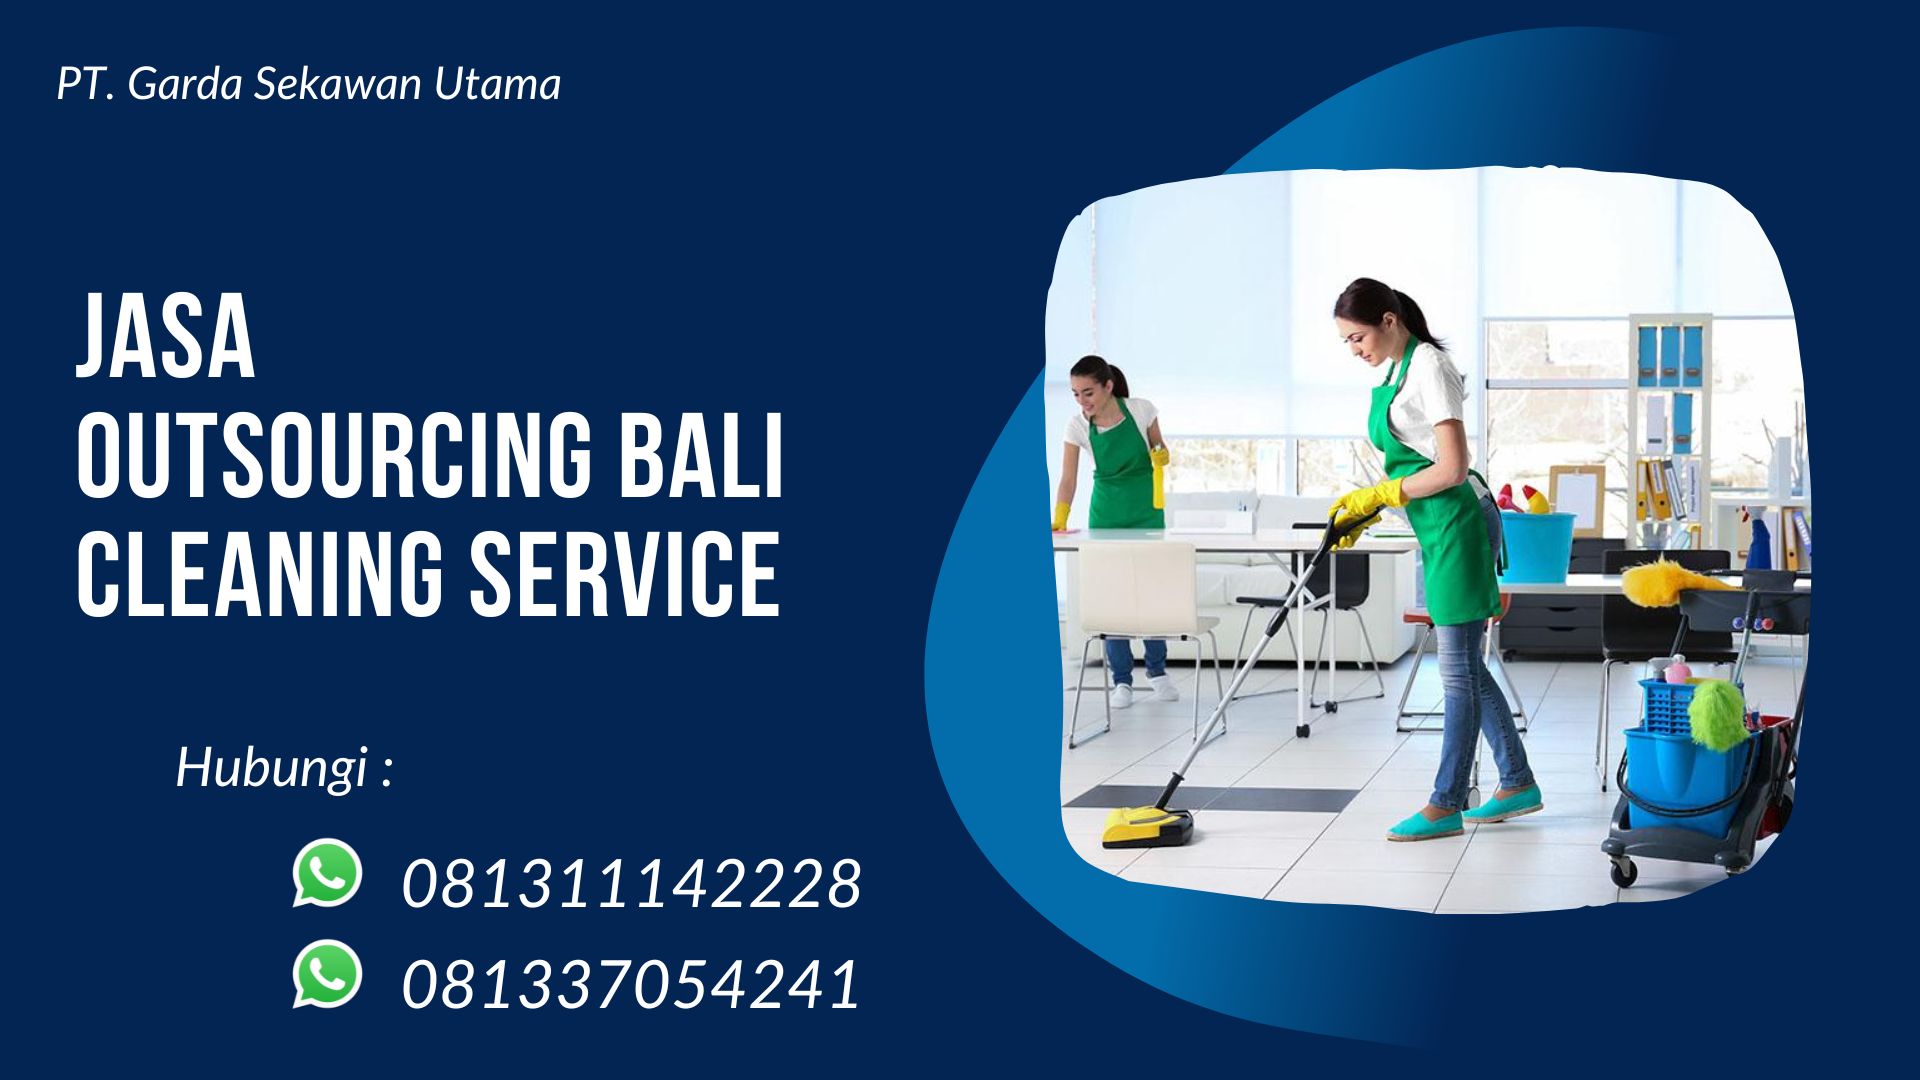 Tempat Jasa Outsourcing Cleaning Services Bali Profesional